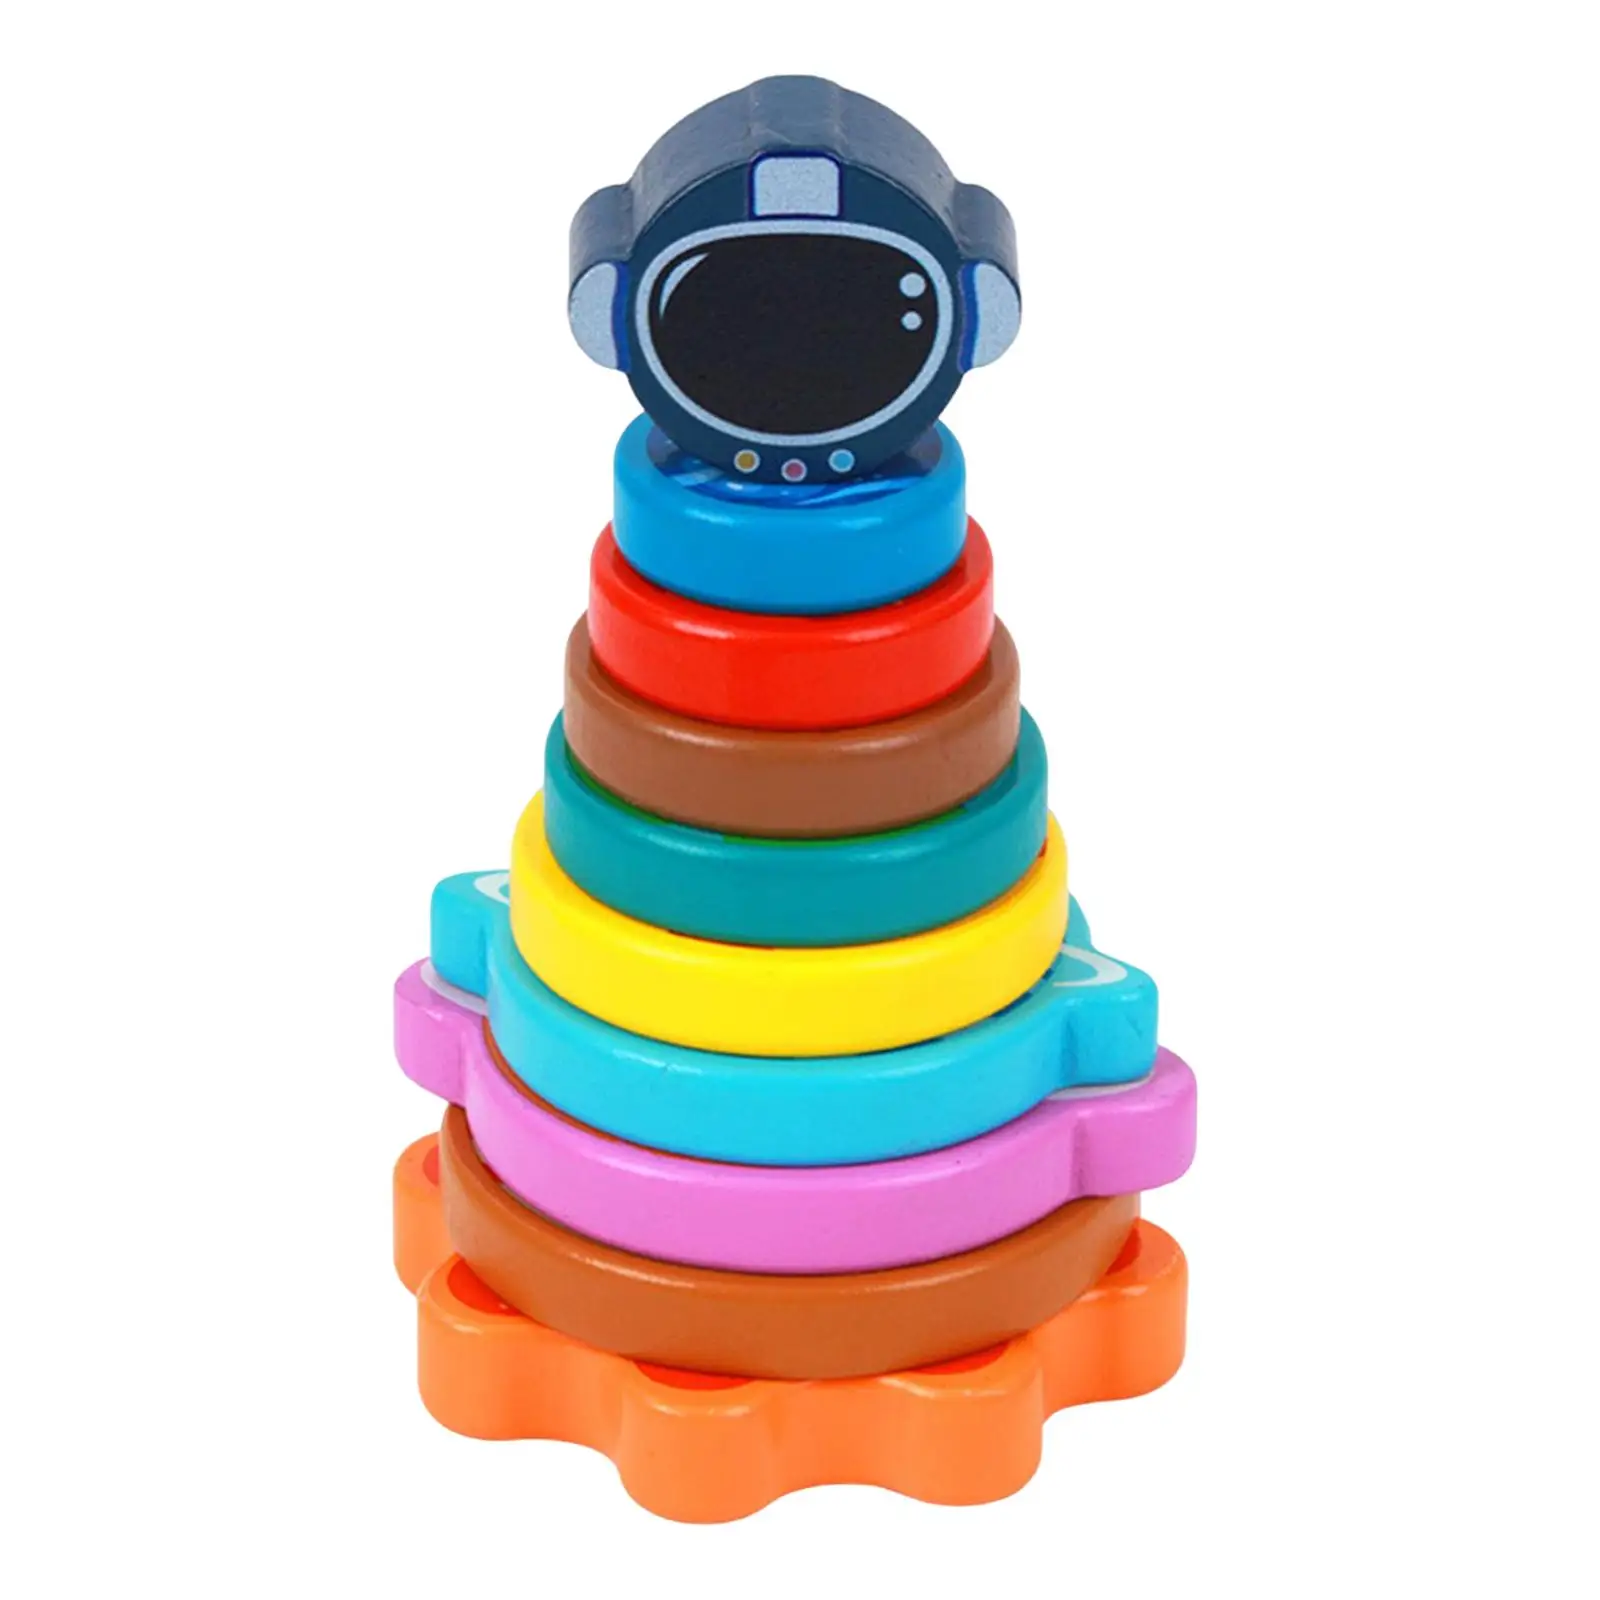 Wooden Stacking Toy Early Education Teaching Aids Stacking Rings Multicolor Rainbow Stacking for Toddlers Gifts